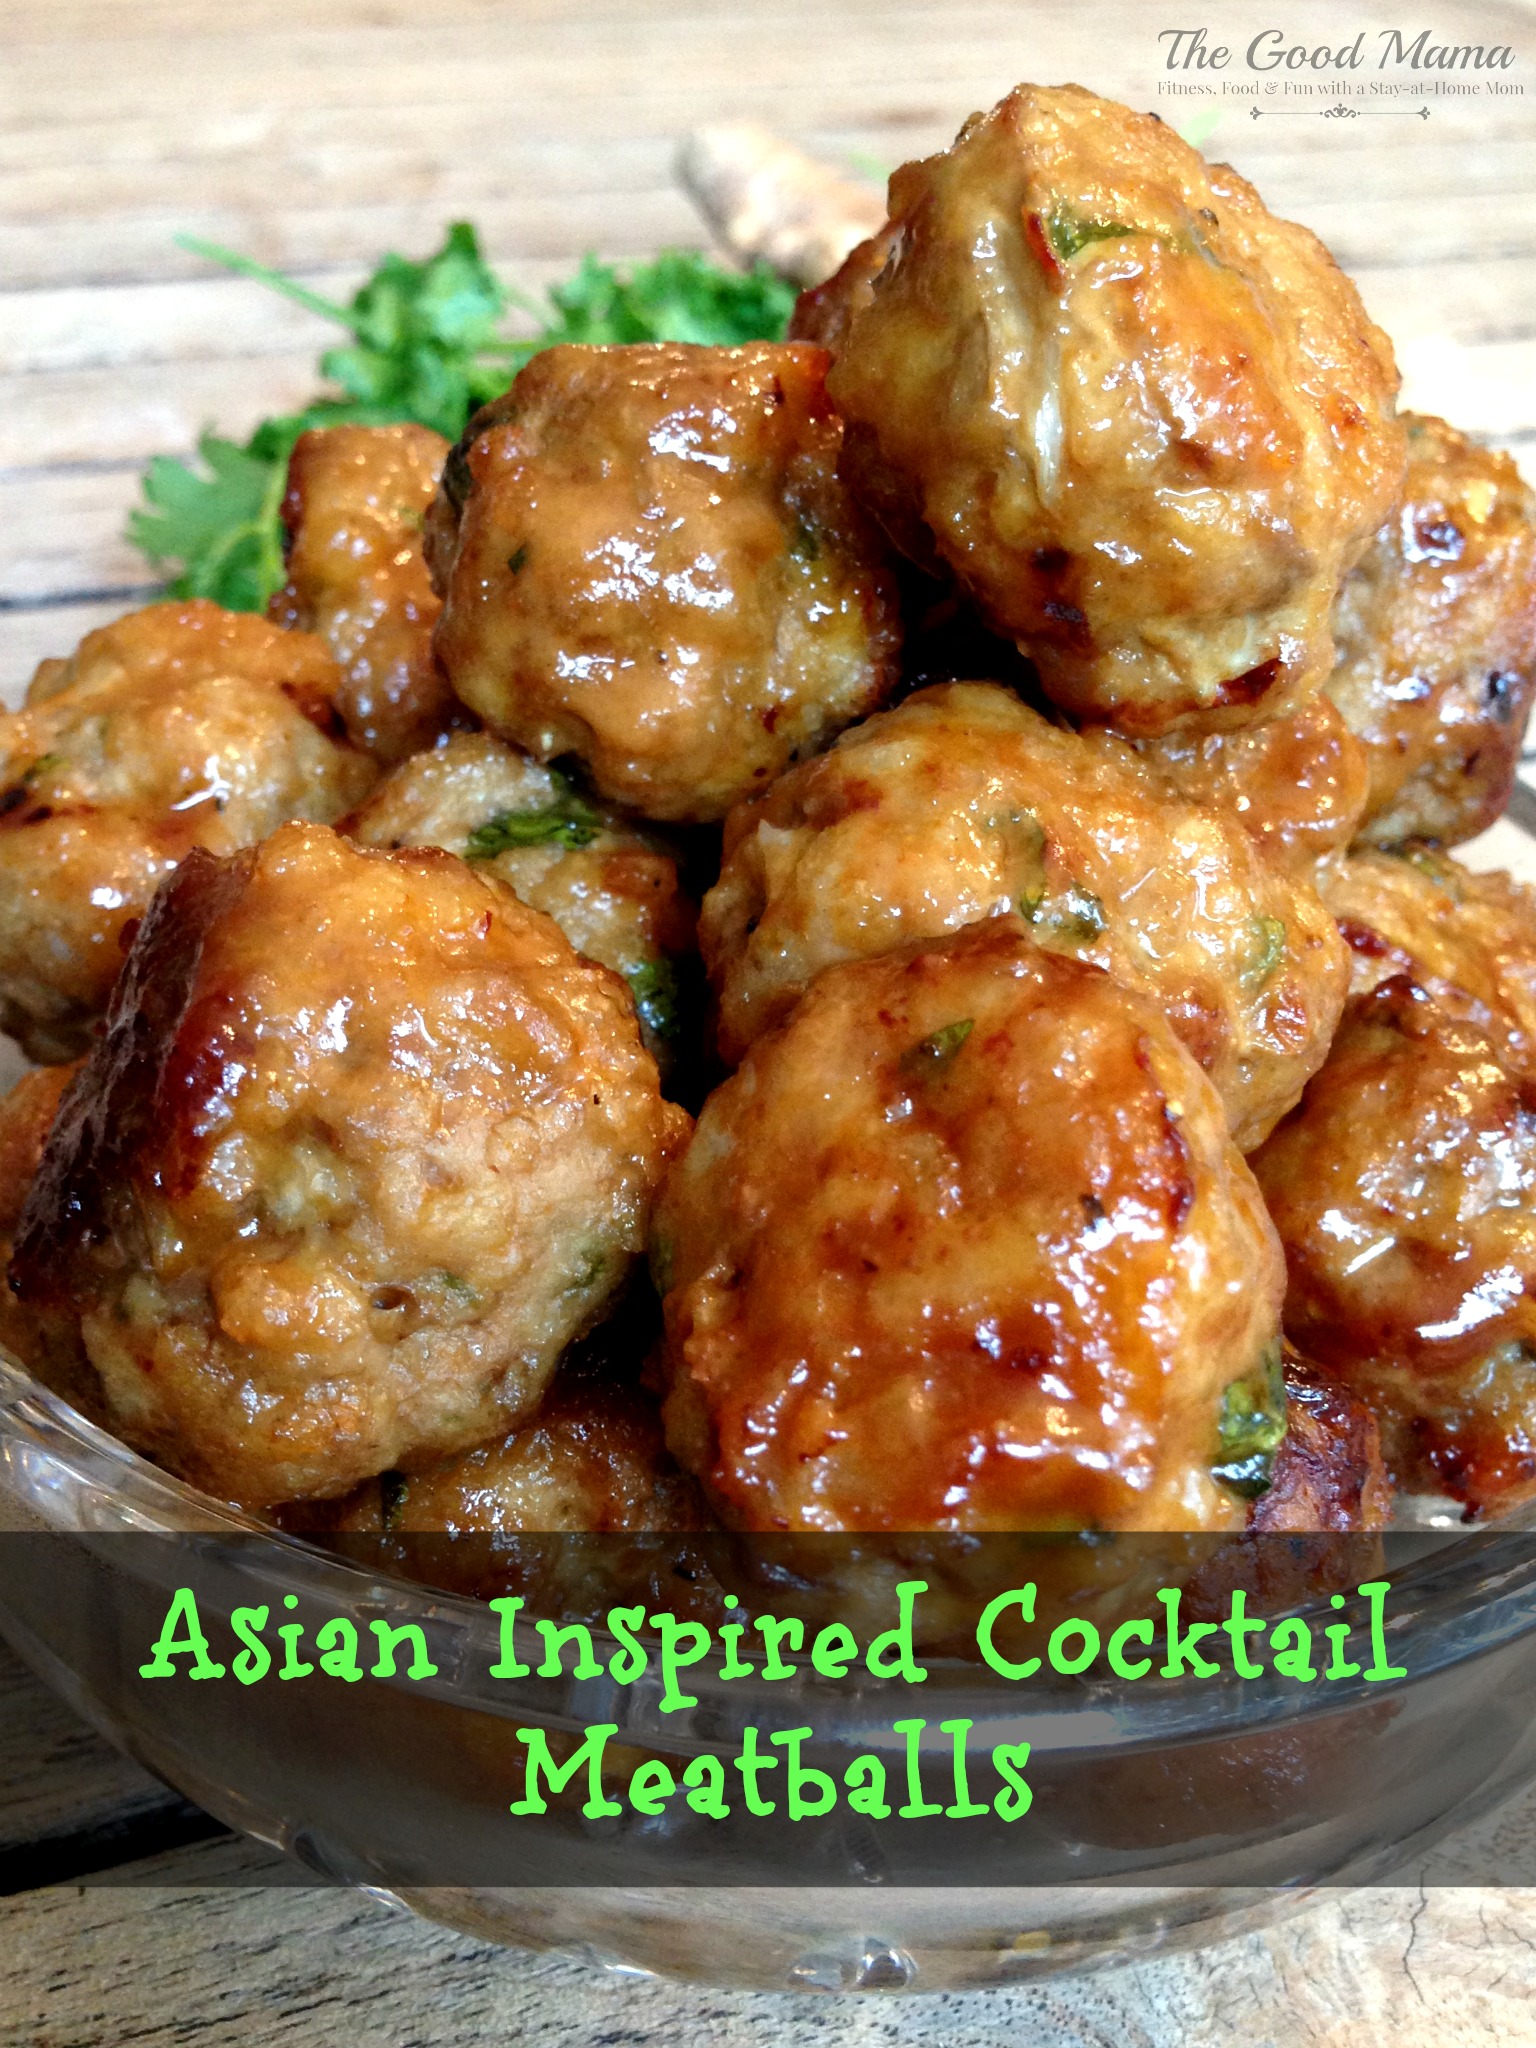 Asian Inspired Cocktail Meatballs